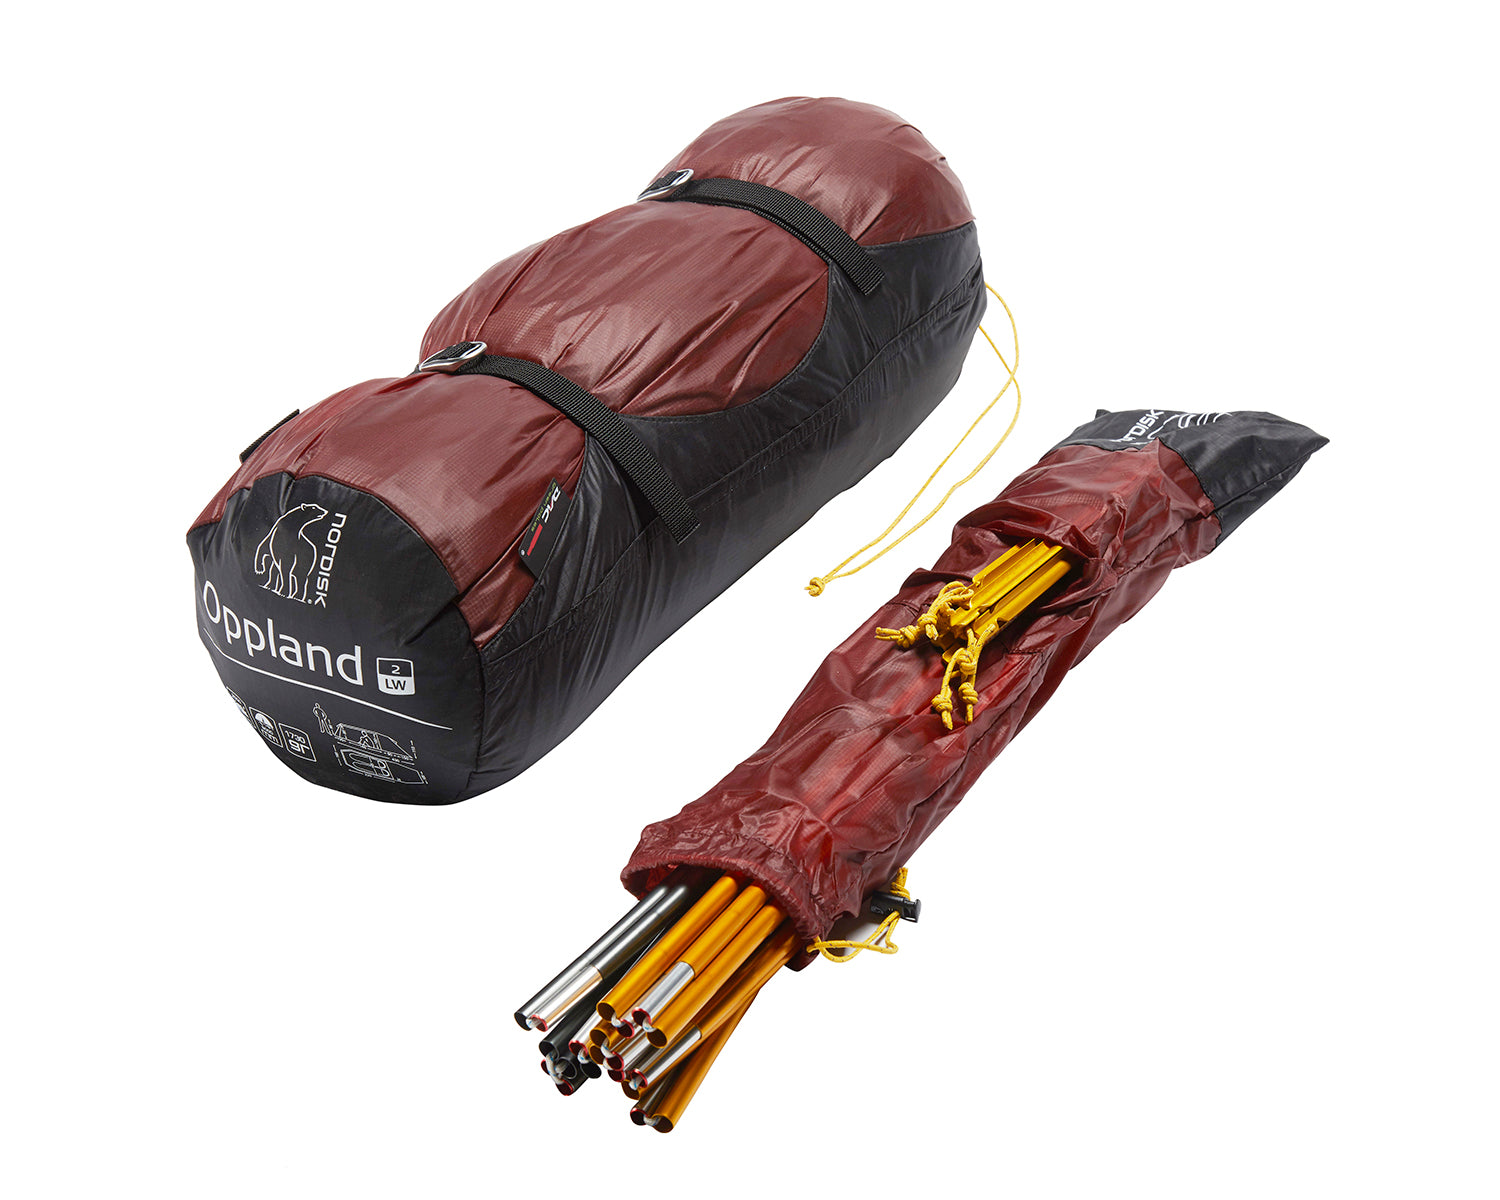 Oppland 2 LW tent - 2 person - Burnt Red